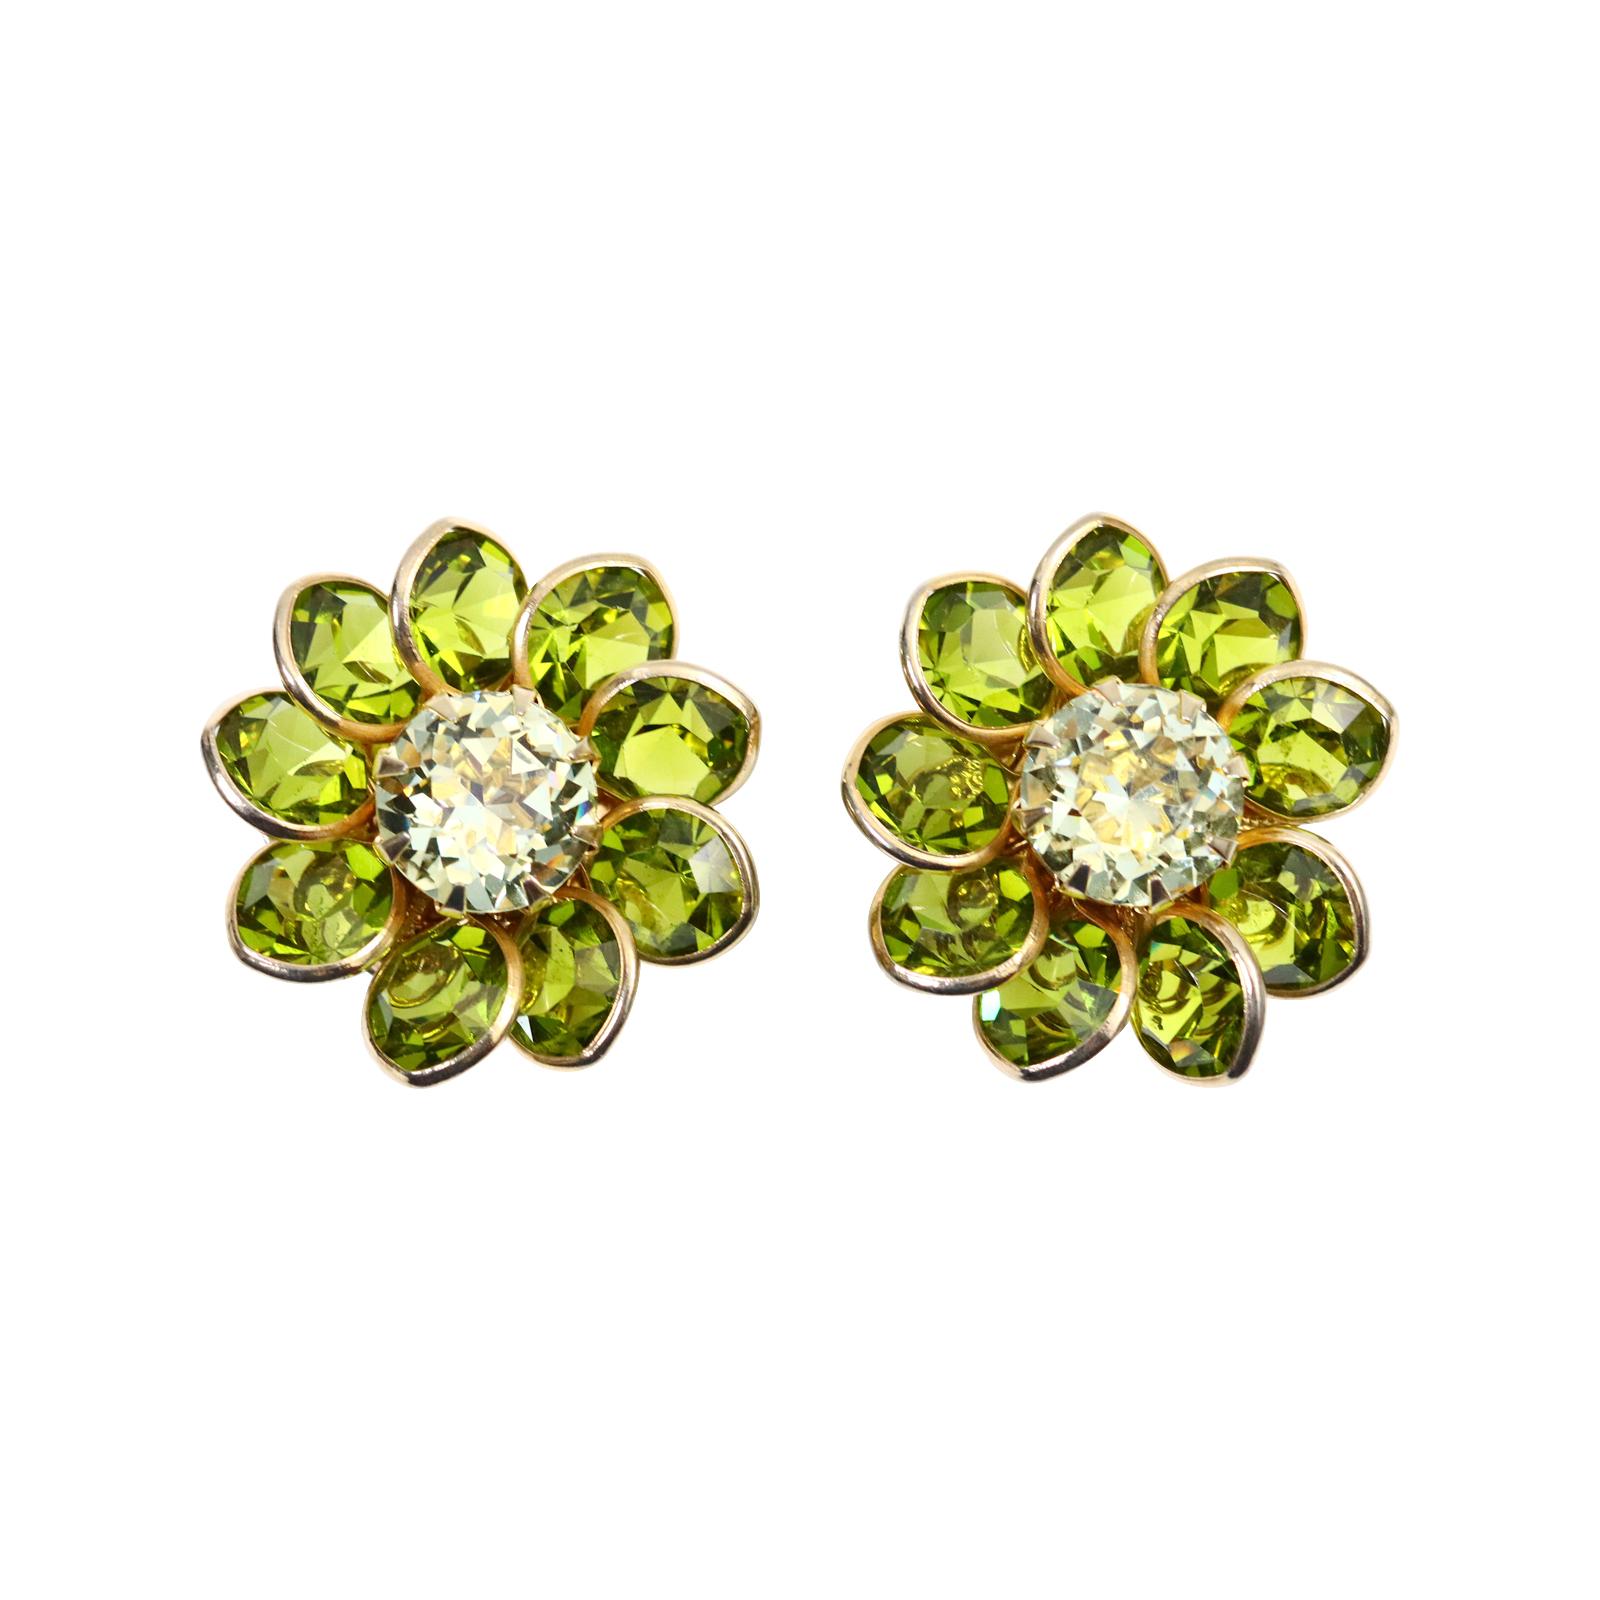 Vintage Poured Glass Gold Tone Green With Diamante Flower Earrings Circa 1960s. Even the photos can't capture the beauty of these earrings.  Each of the petals are green glass and surrounded by gold.  All the petals slightly move and then in the